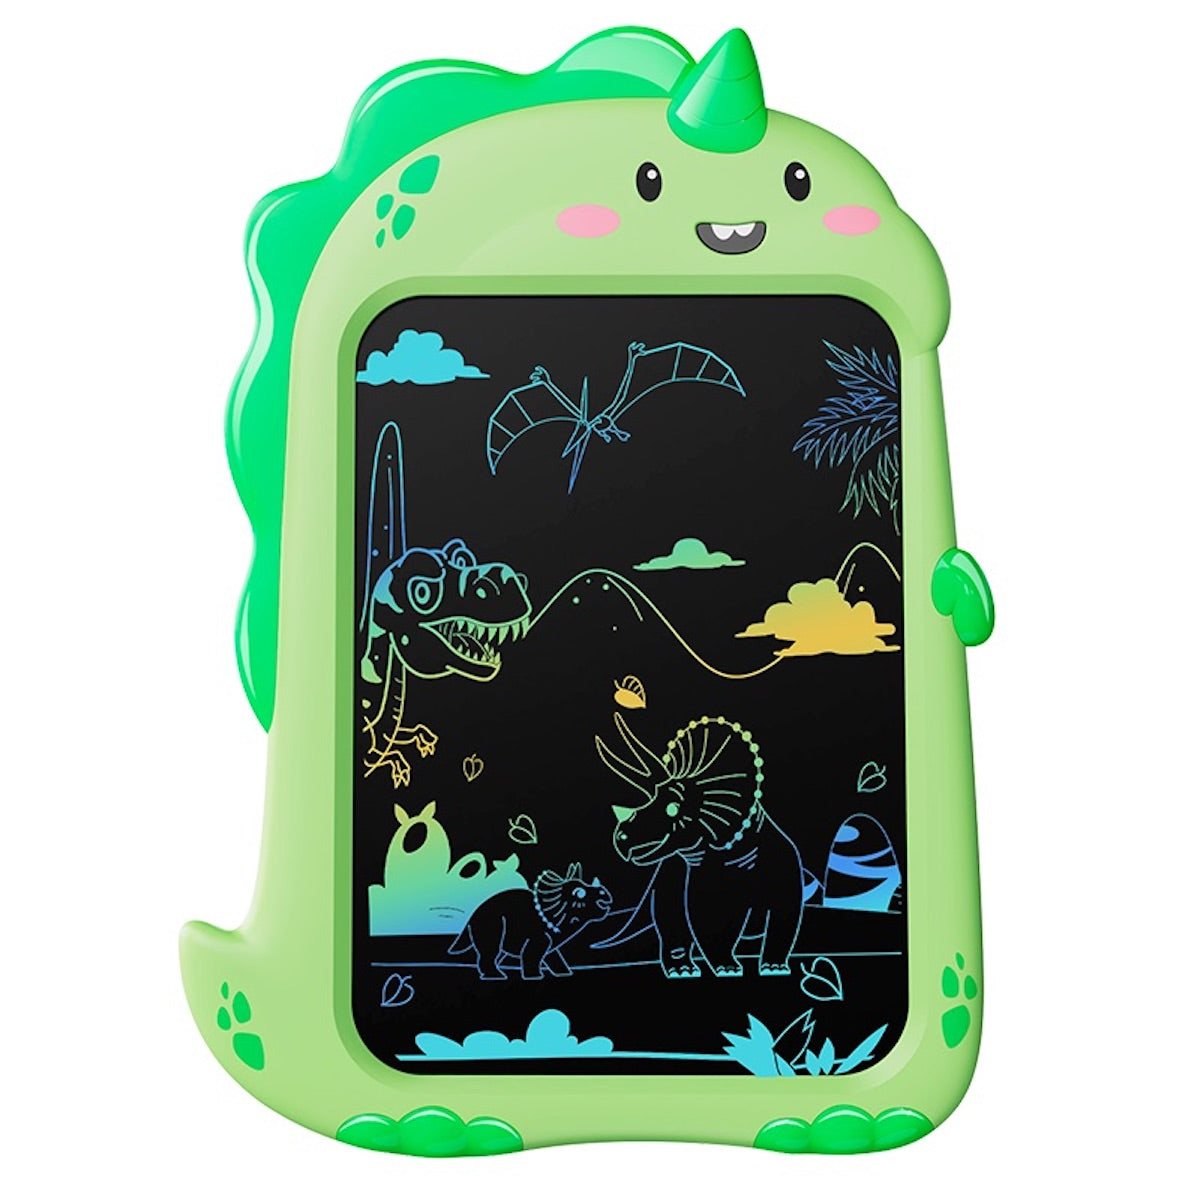 ANANK LCD Pad Arts & Drawing Tablet Gift For Kids Drawing Electronic Writing Board With Stylus Cartoon Dinosaur